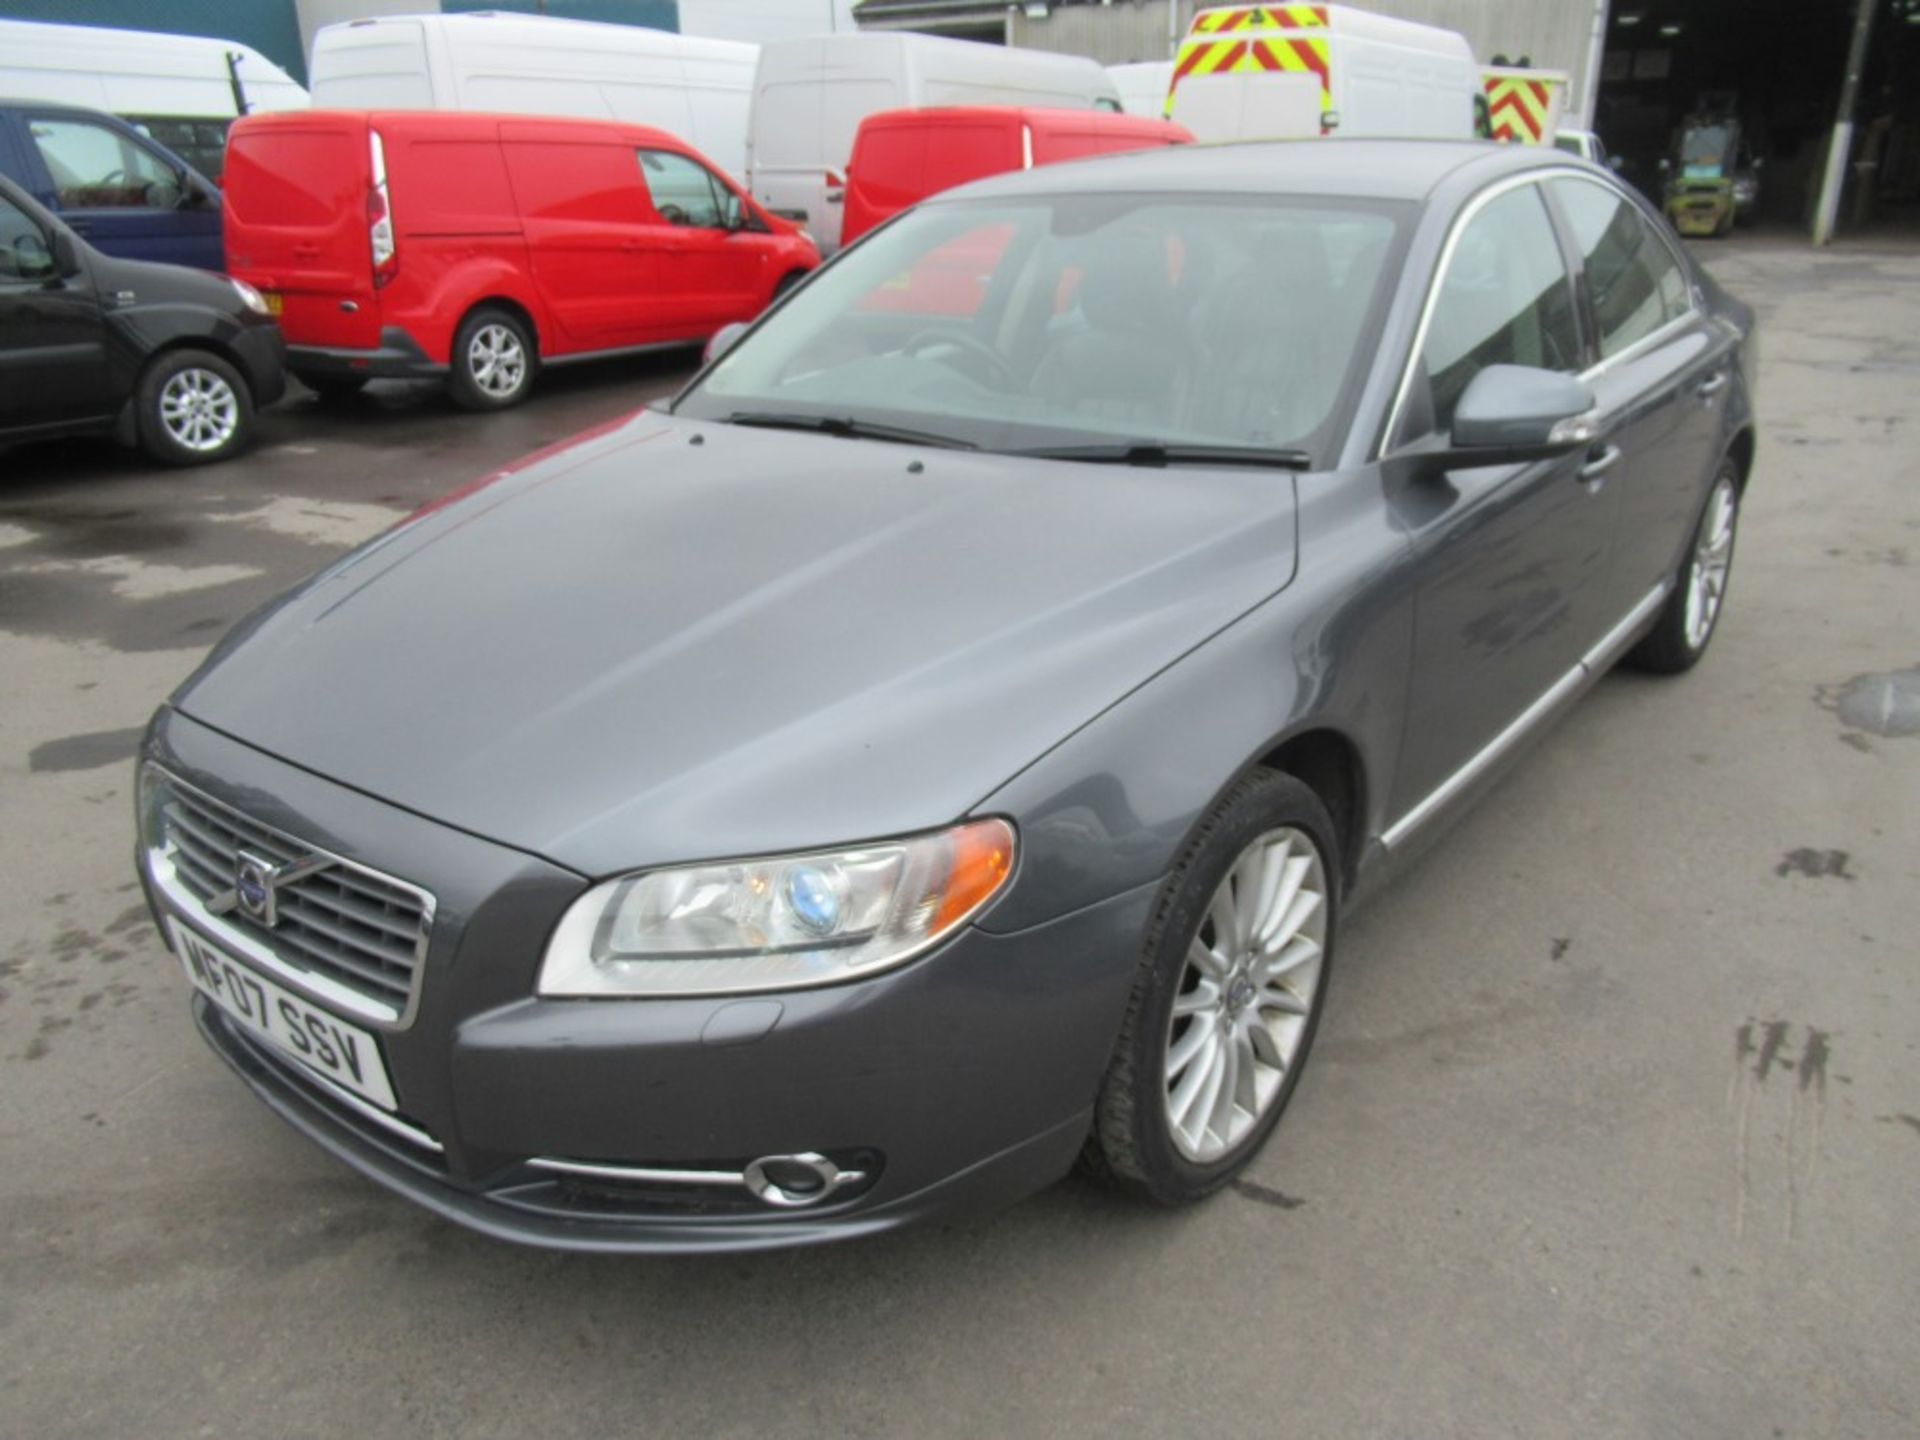 07 reg VOLVO S80 EXECUTIVE DS A (DIRECT COUNCIL) 1ST REG 03/07, TEST 03/20, 84492M, V5 HERE, 1 - Image 2 of 5